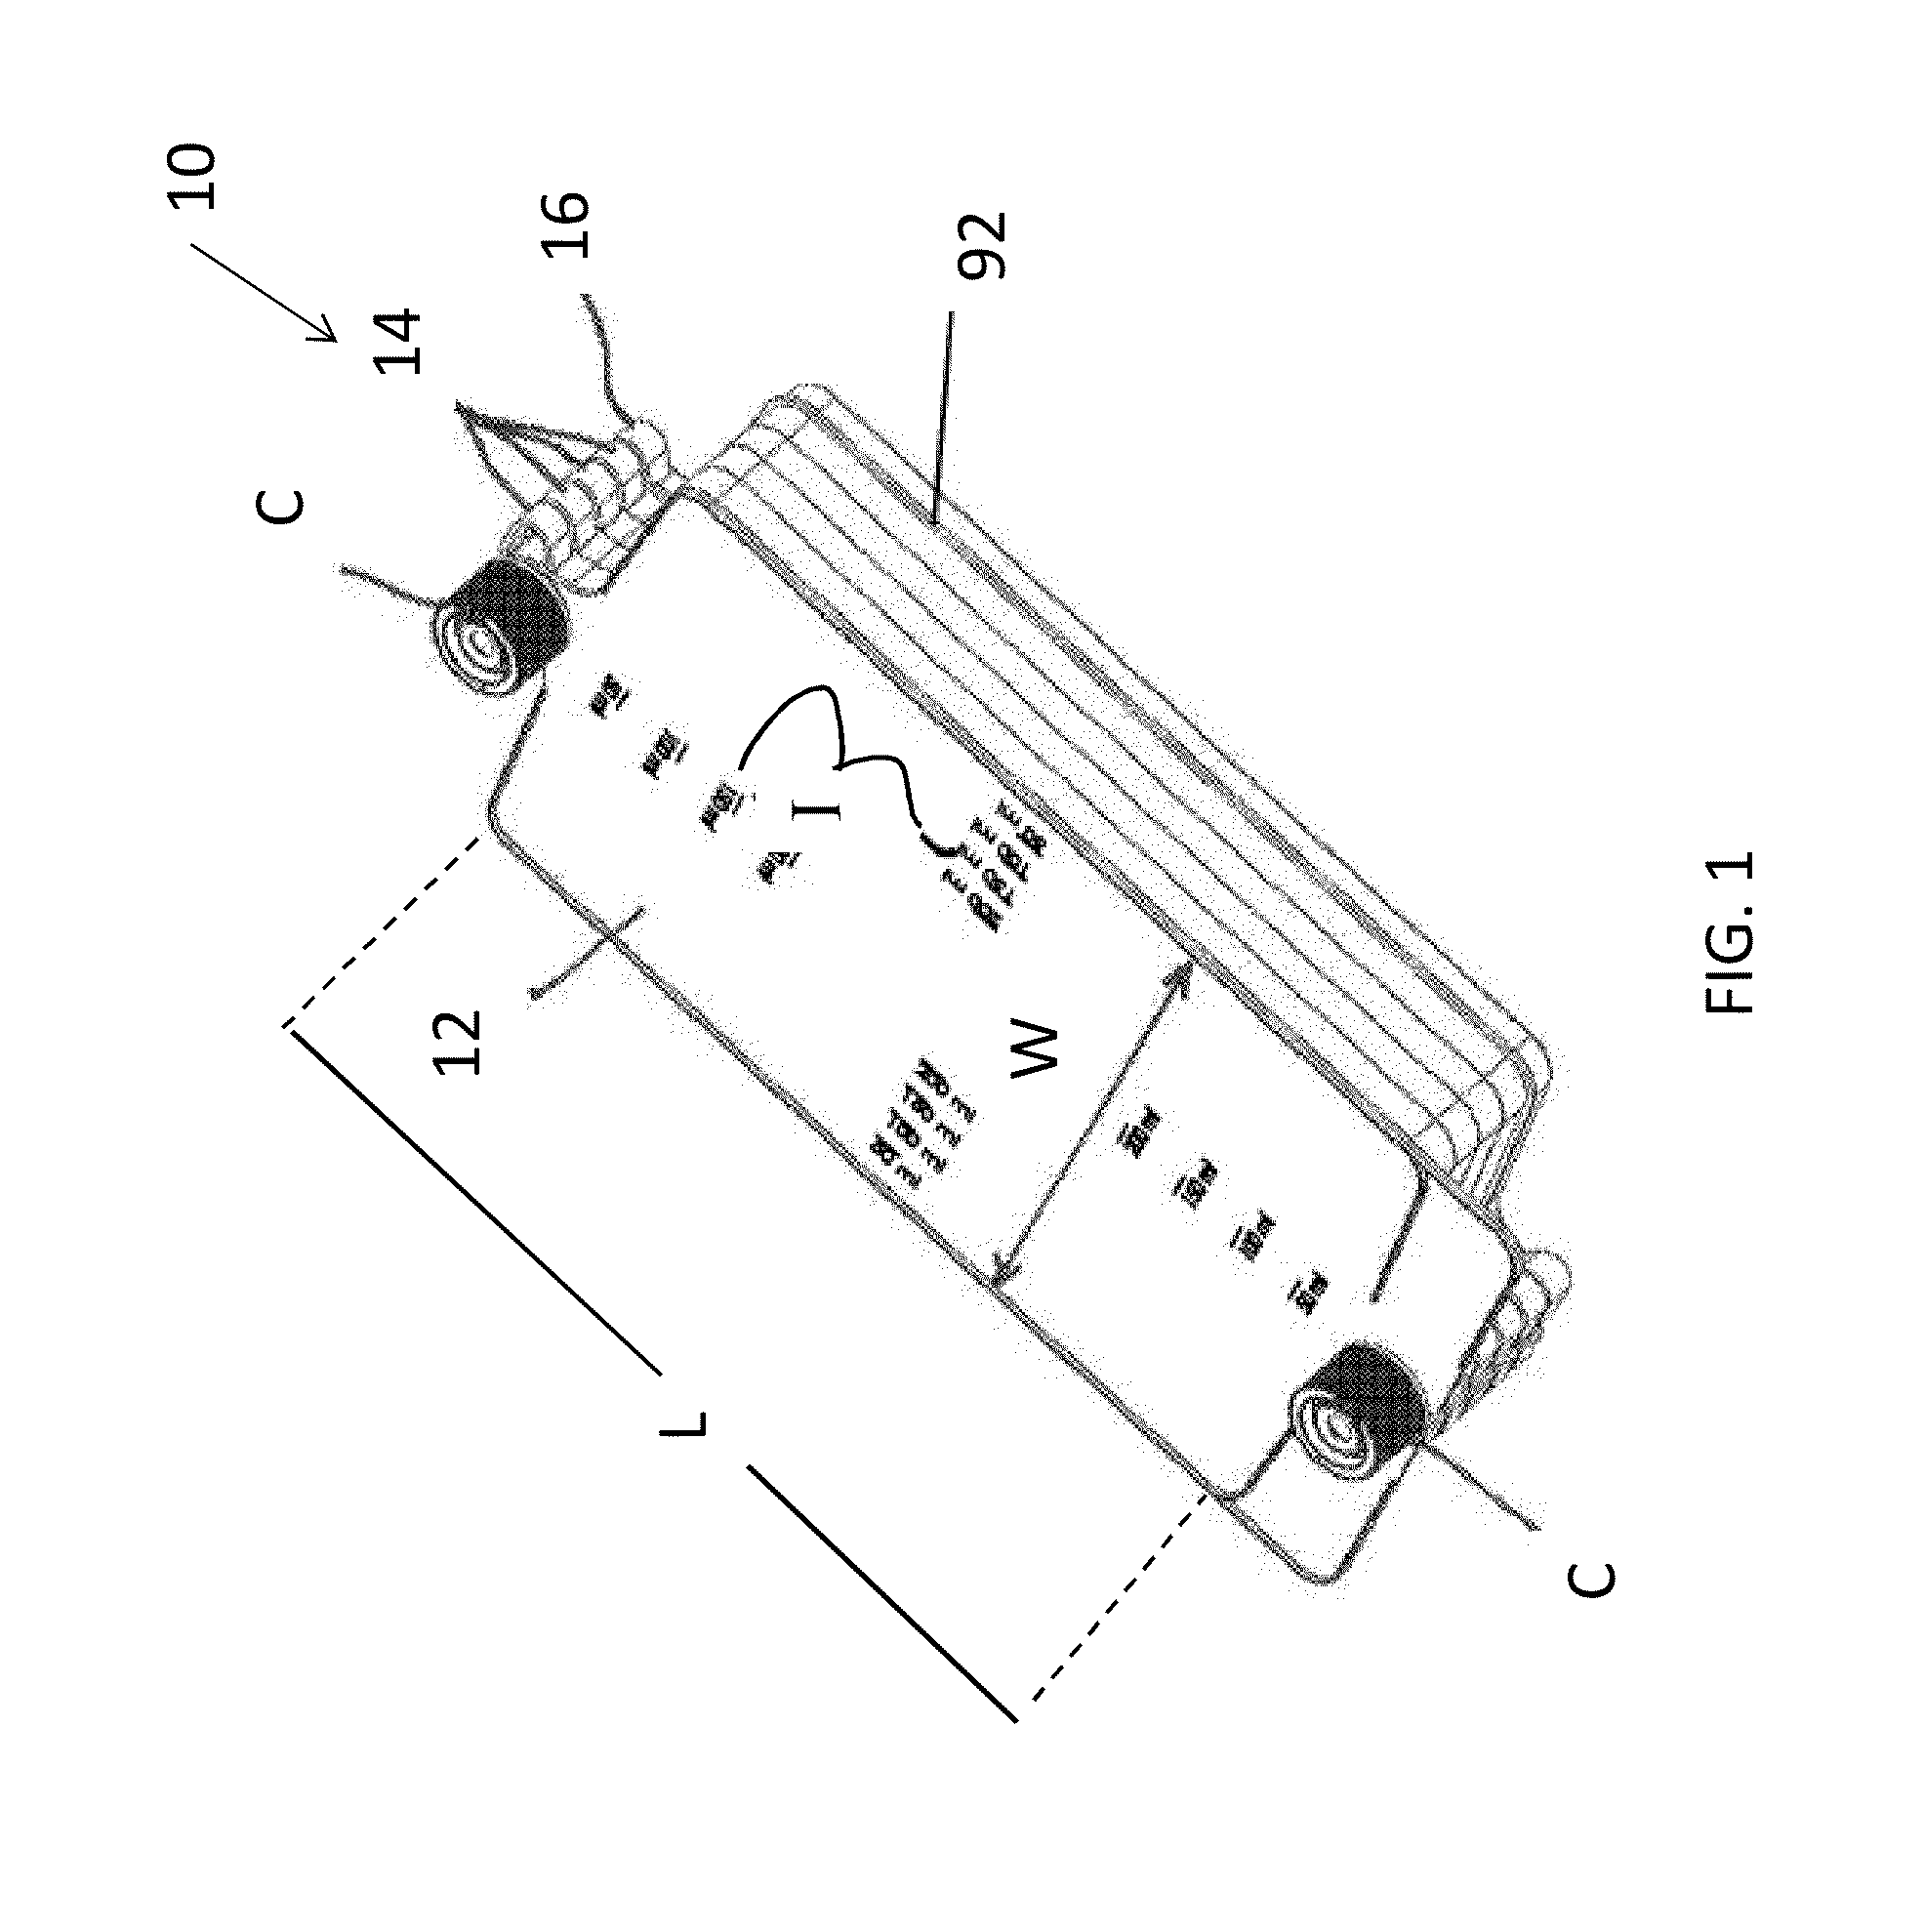 Multi-layered cell culture vessel with manifold grips